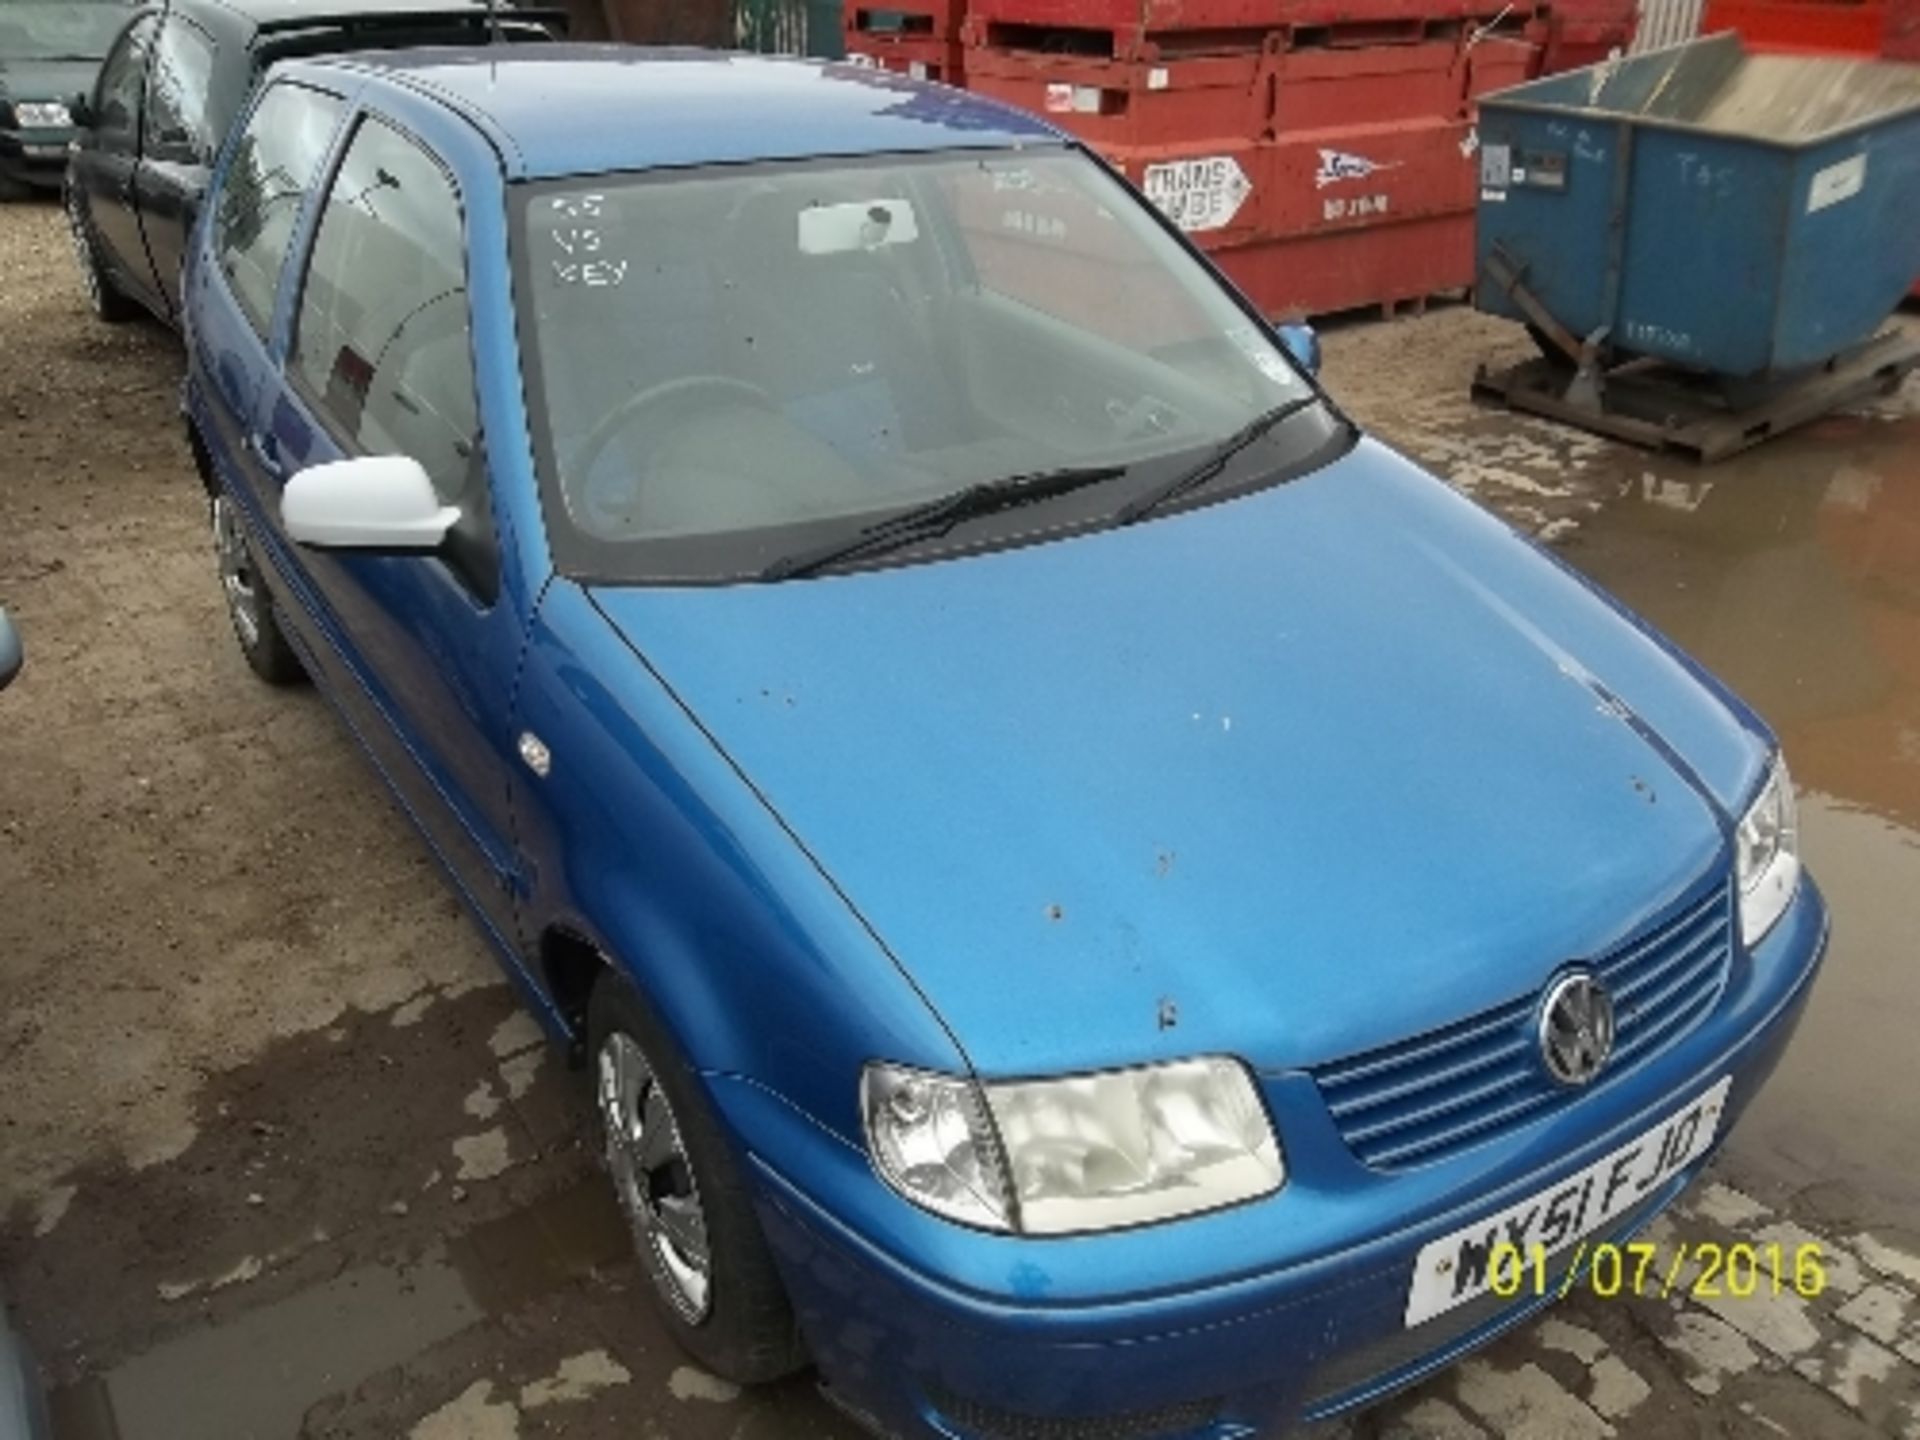 Volkswagen Polo Match - WX51 FJO Date of registration: 30.11.2001 1390cc, petrol, manual, blue - Image 2 of 4